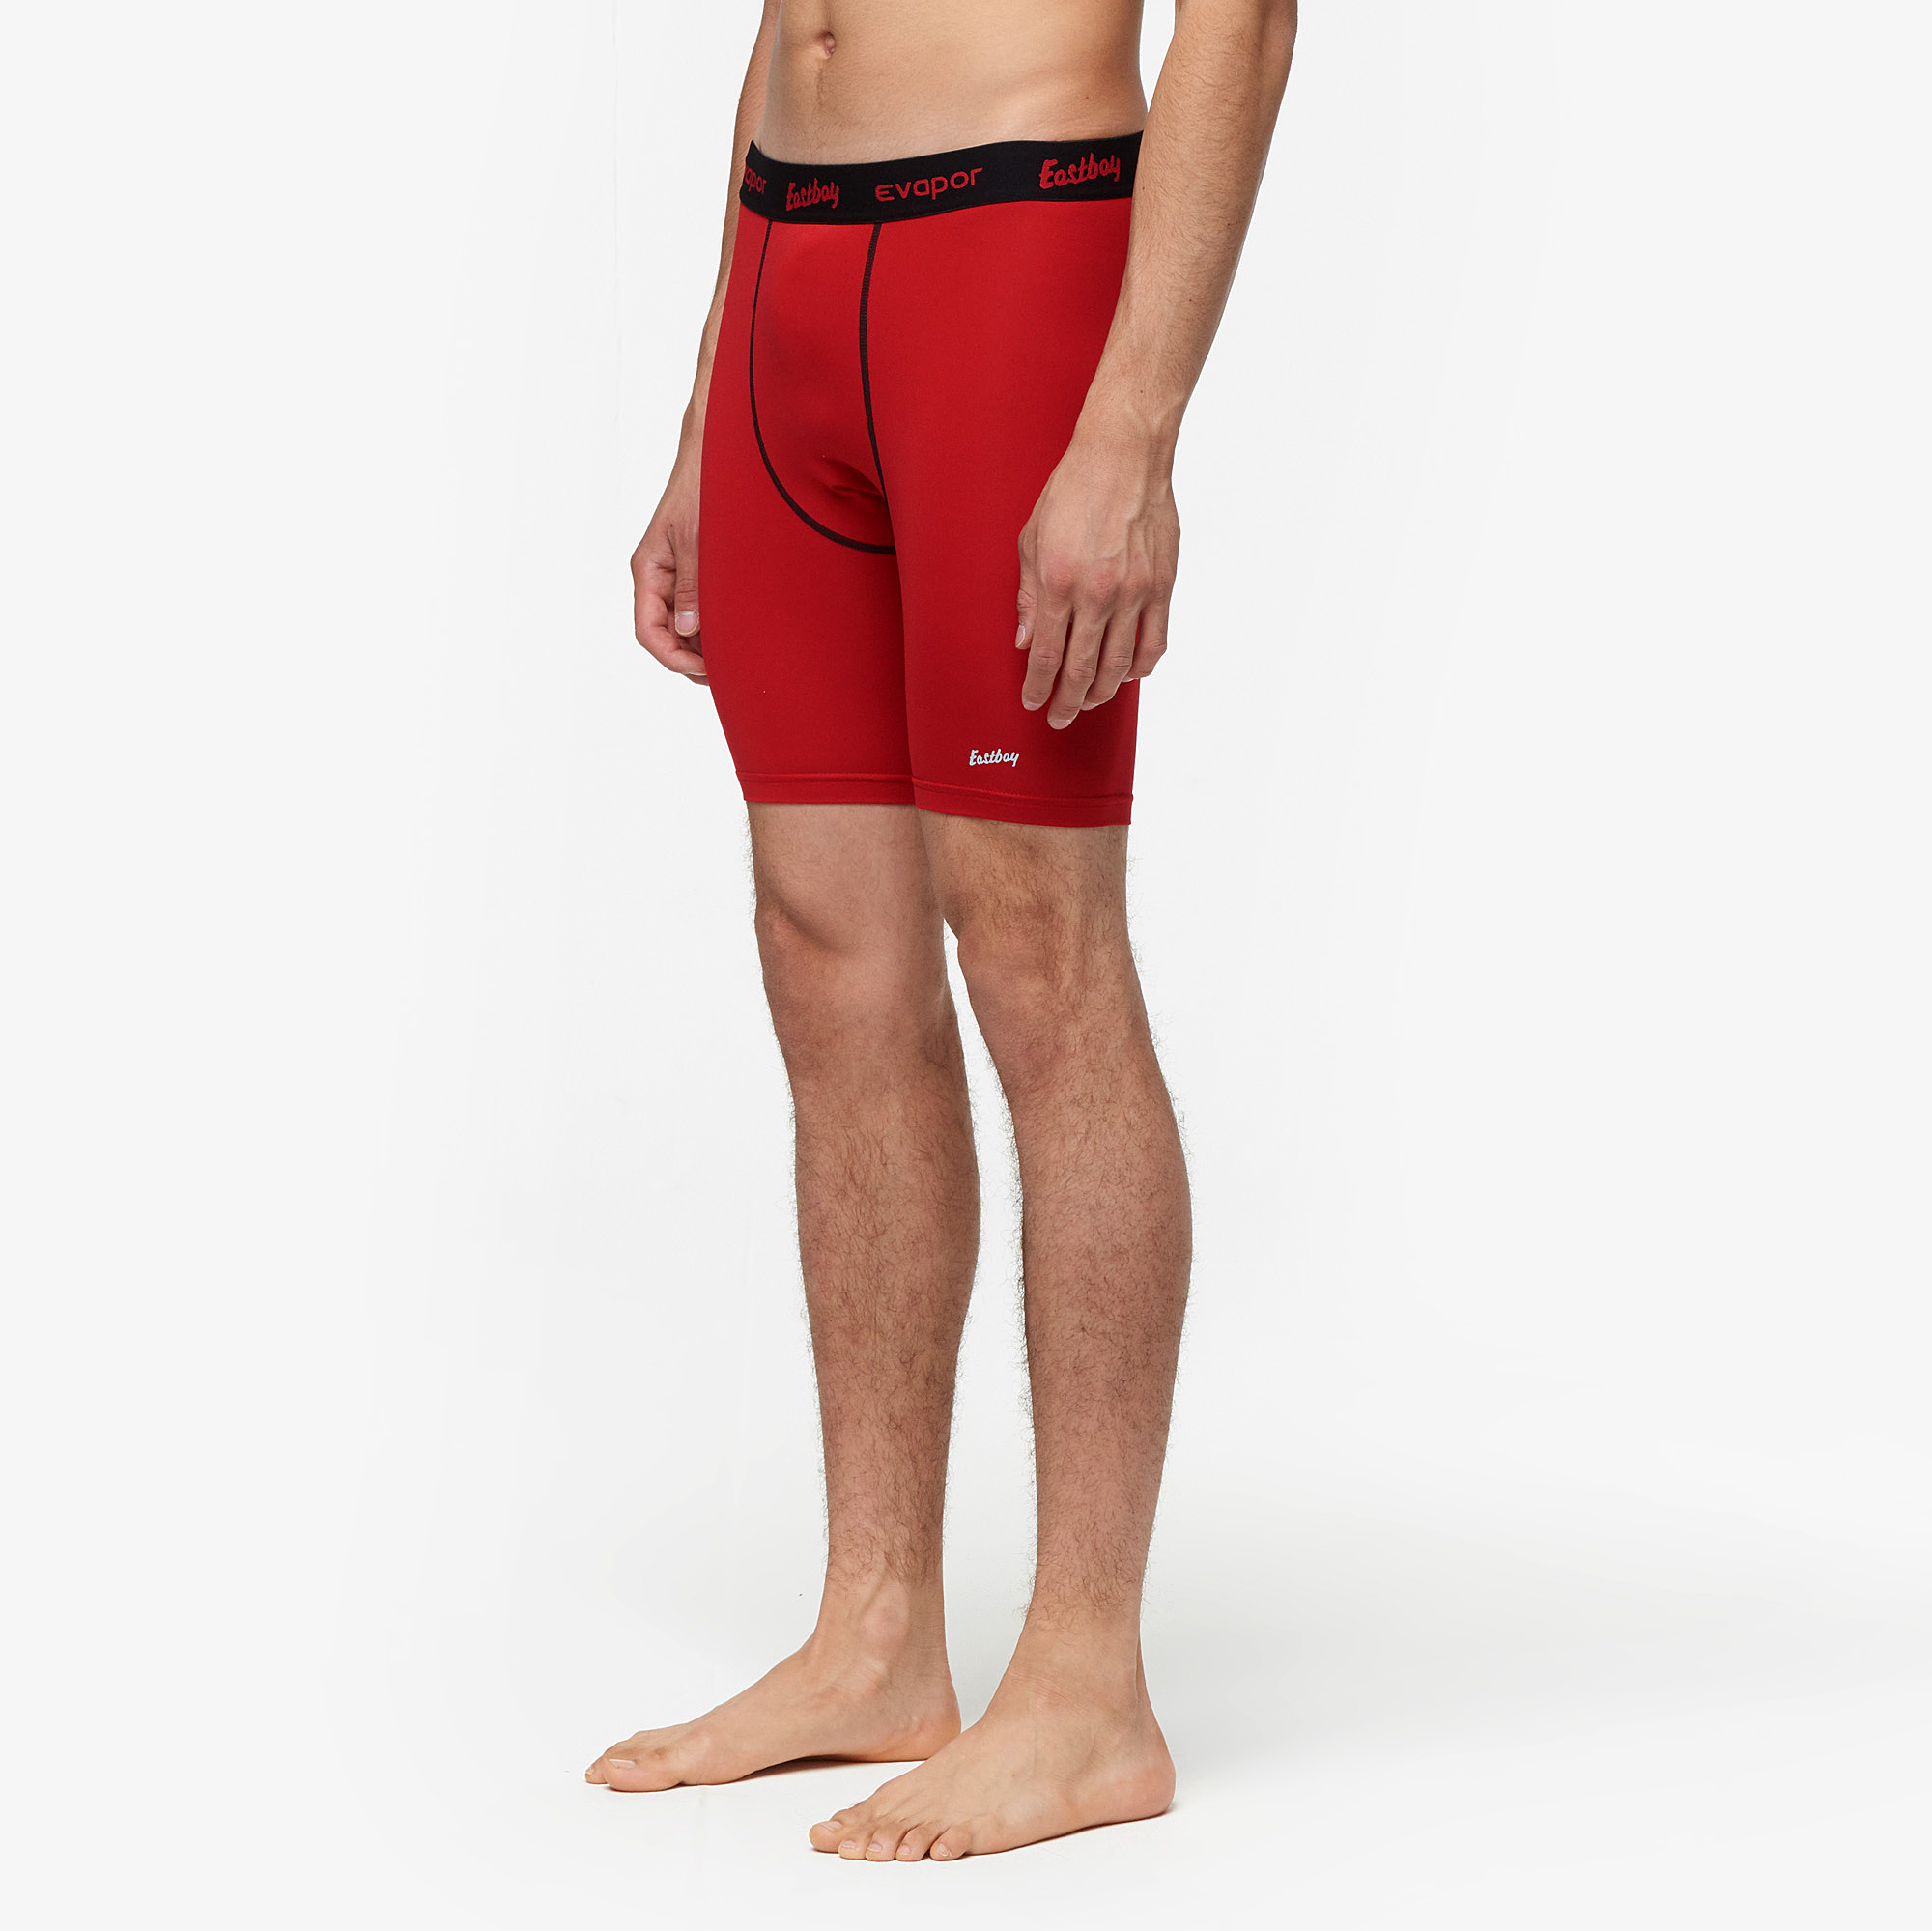 eastbay compression shorts